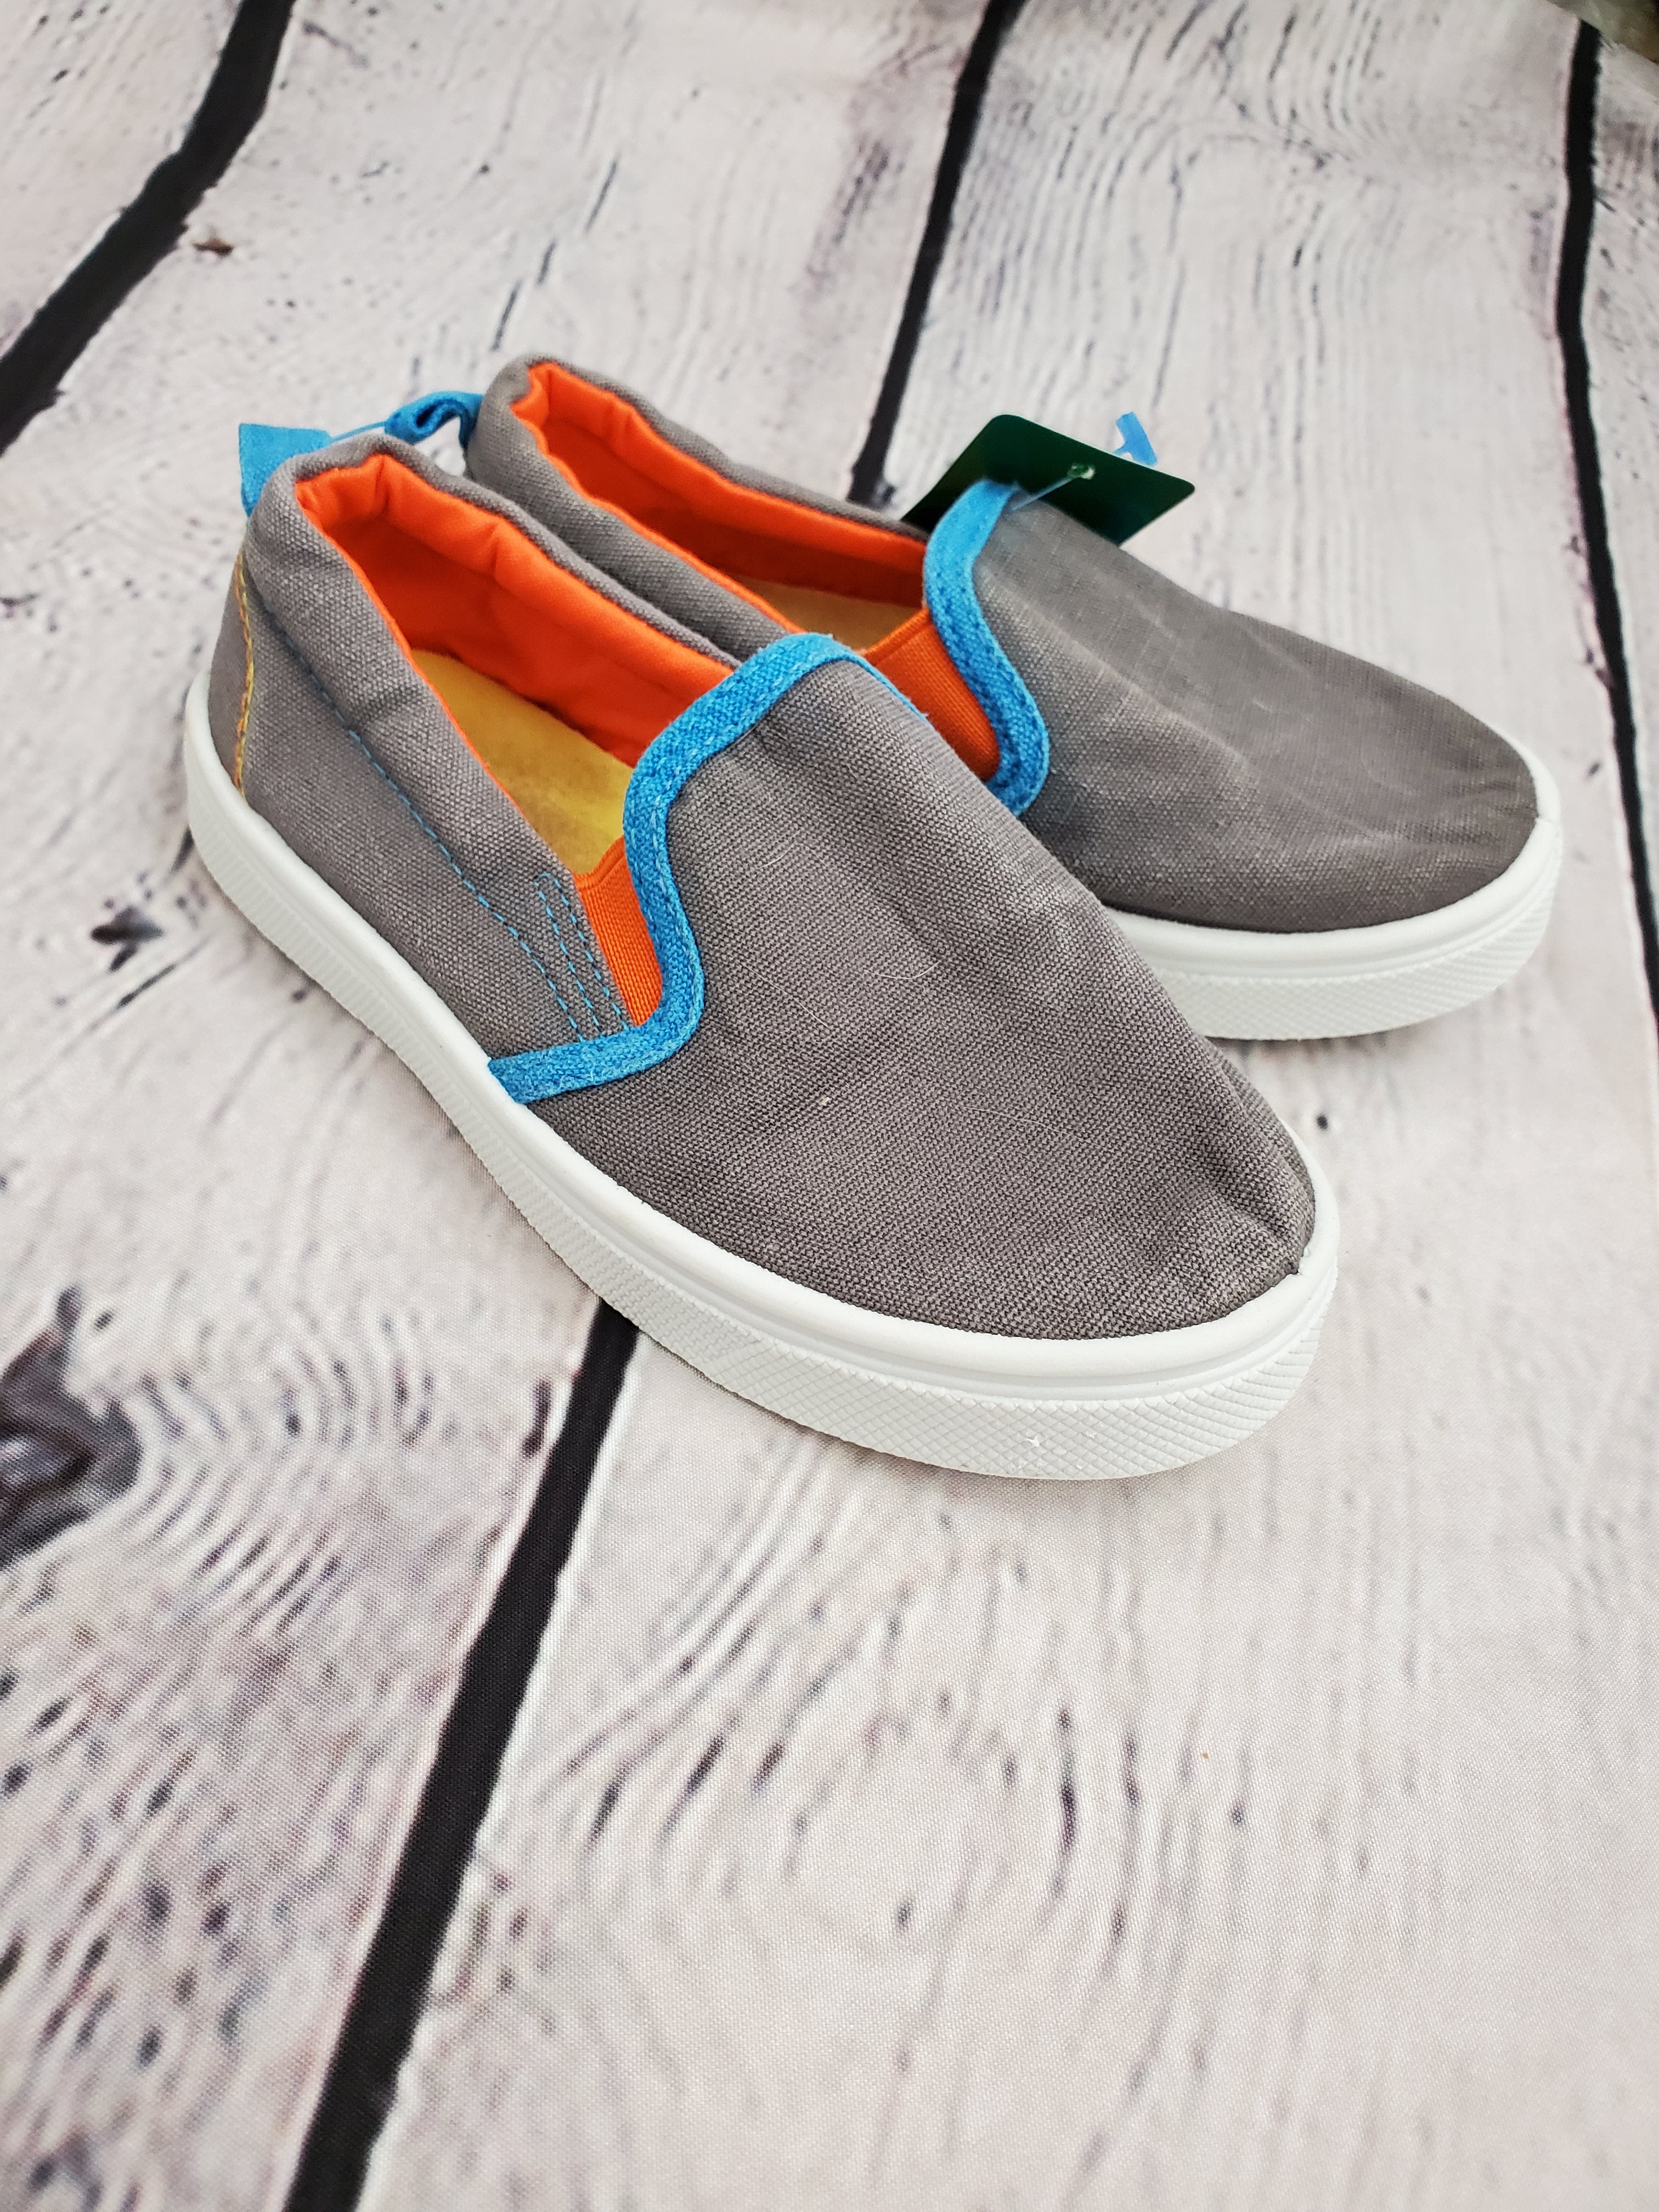 Oomphies boys shoes gray slip ons 9